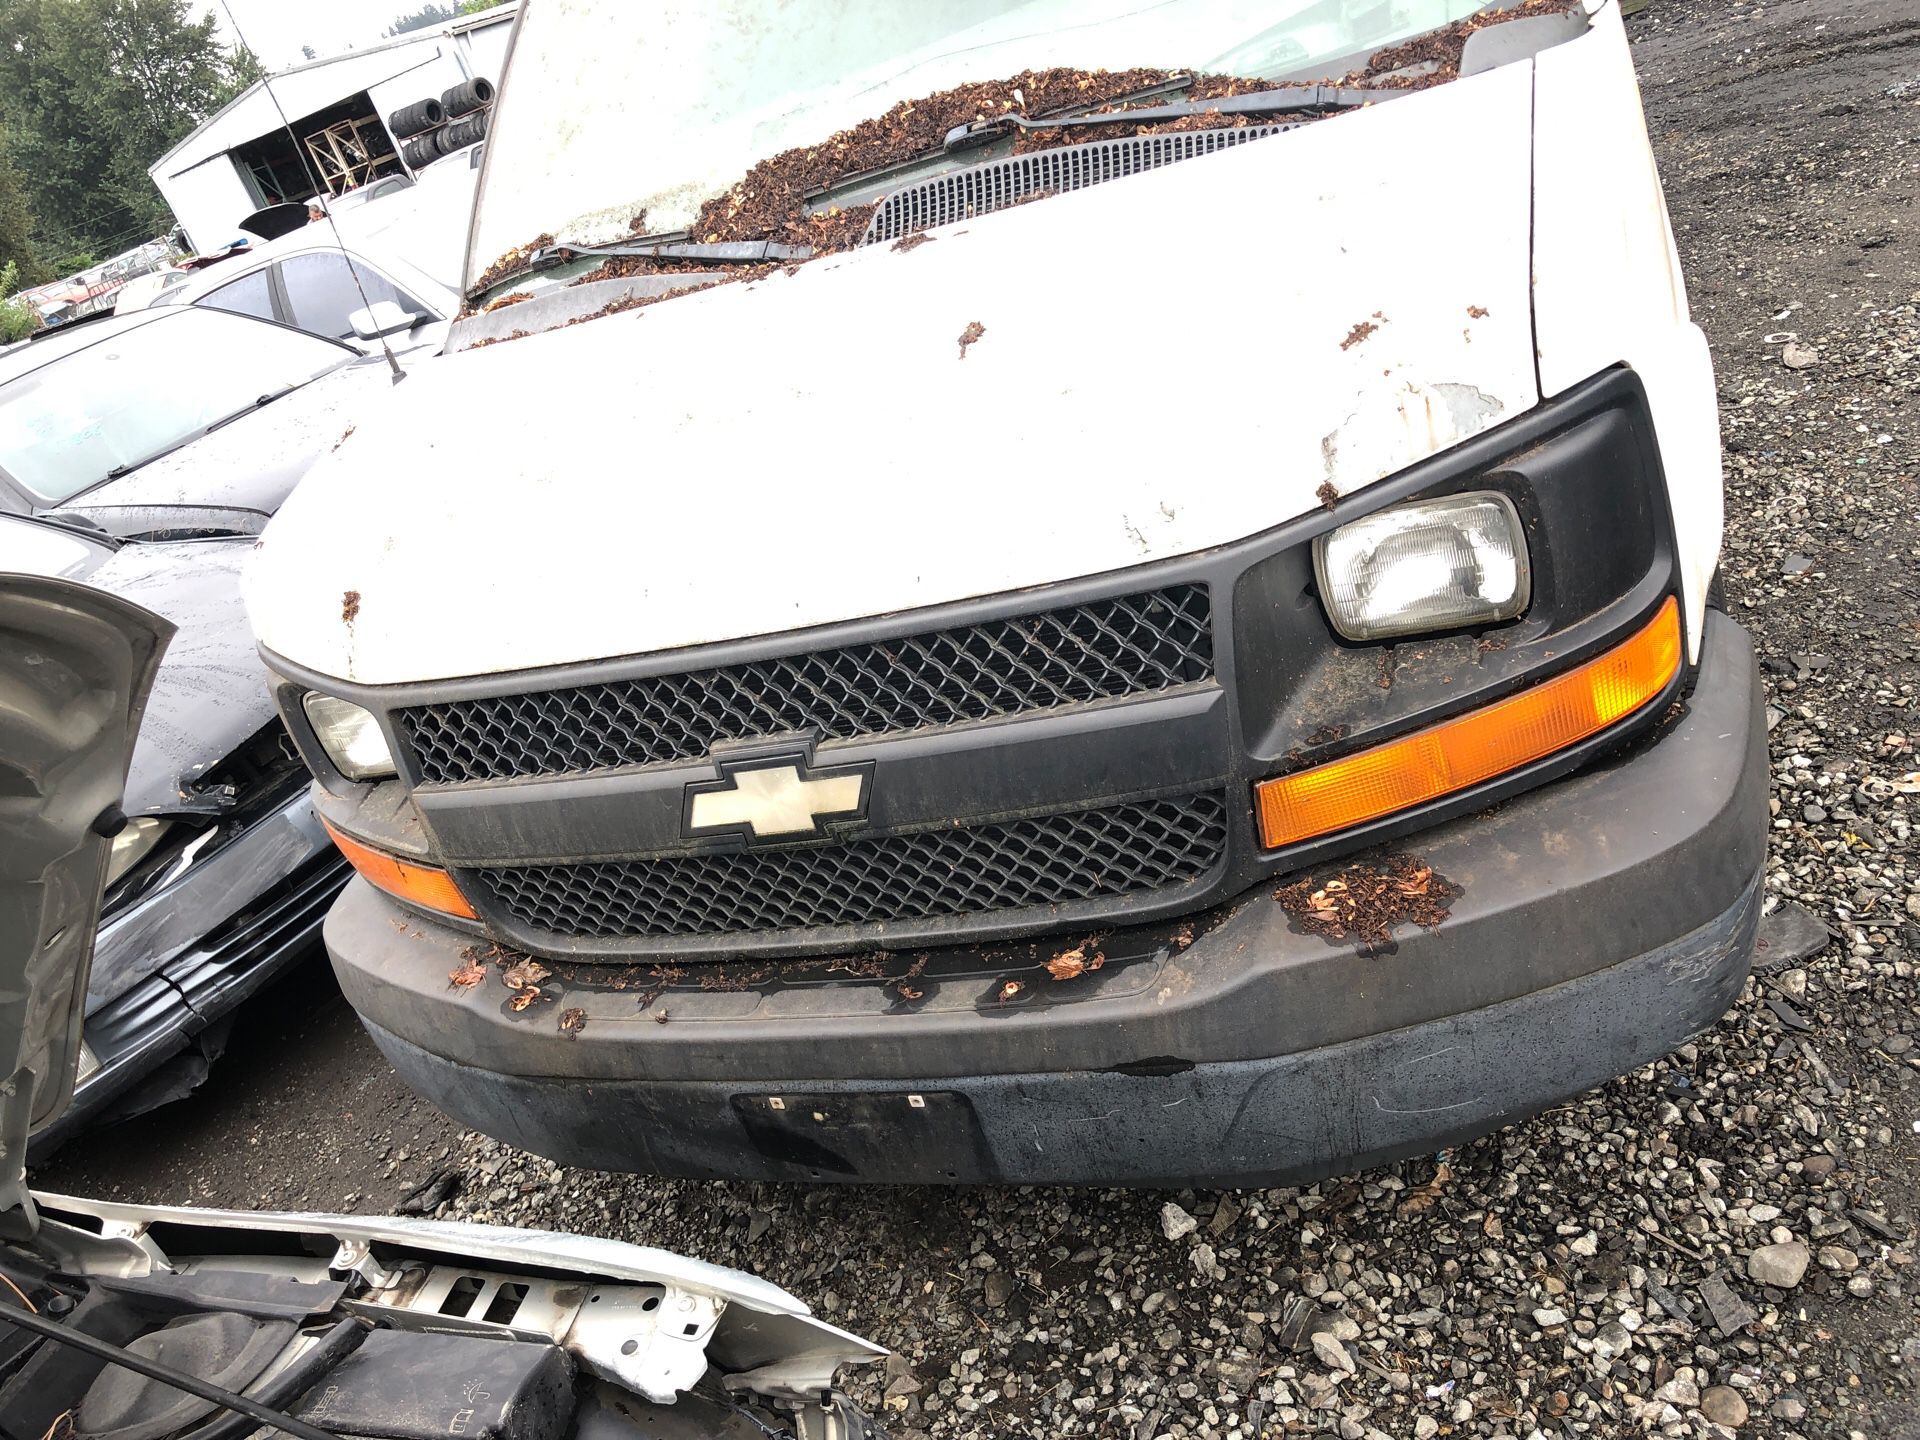 2003 Chevy express 1500 parting out